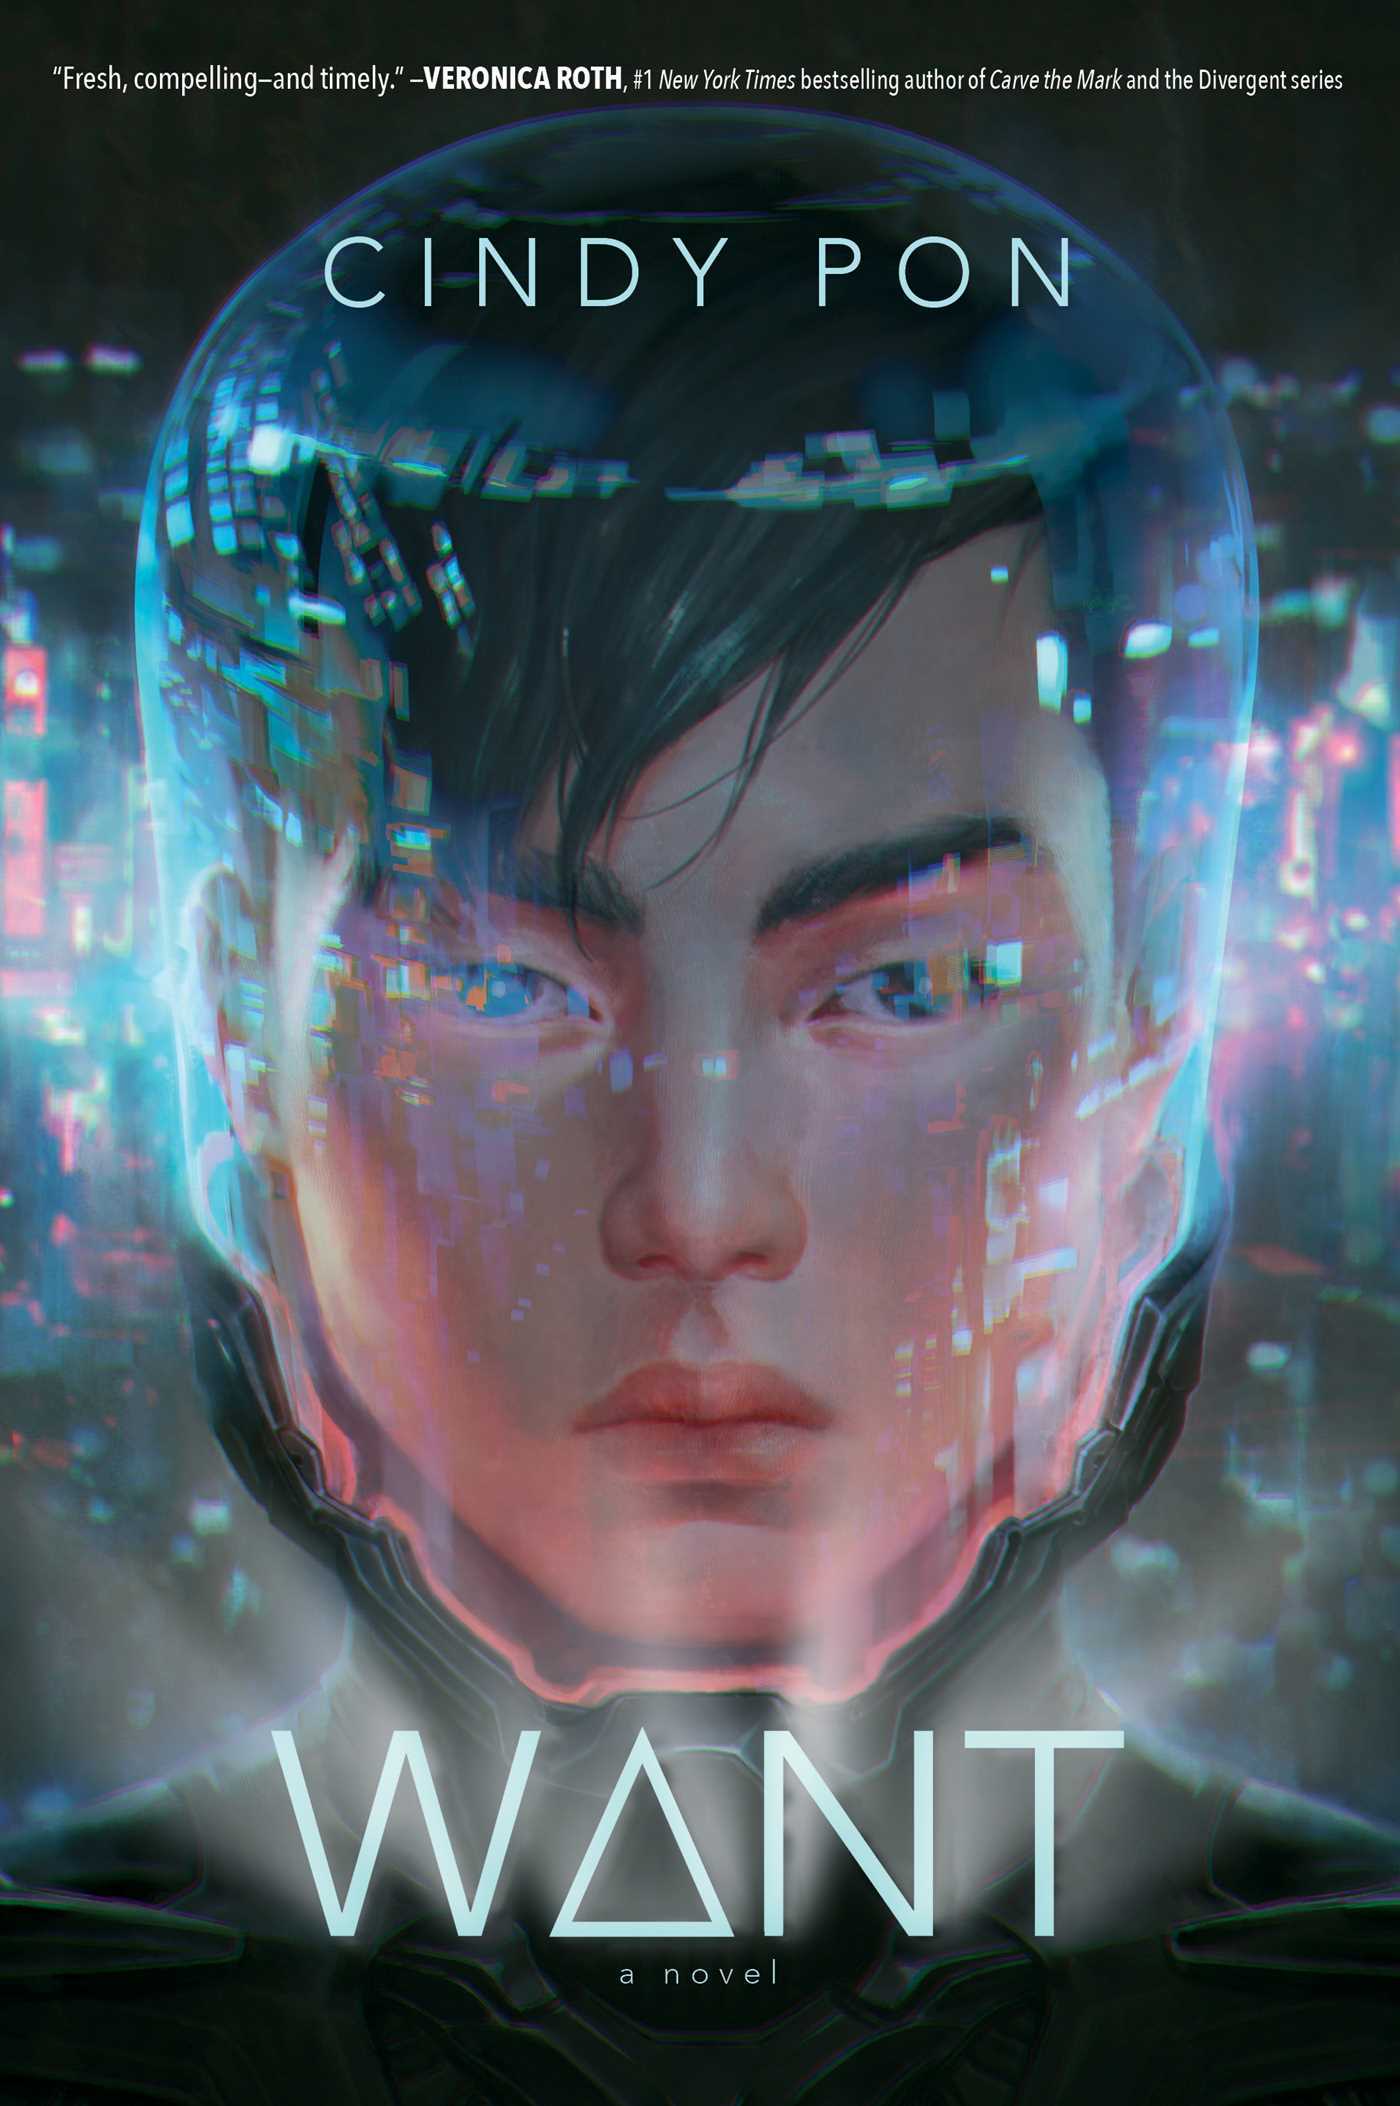 Cover illustration for "Want"